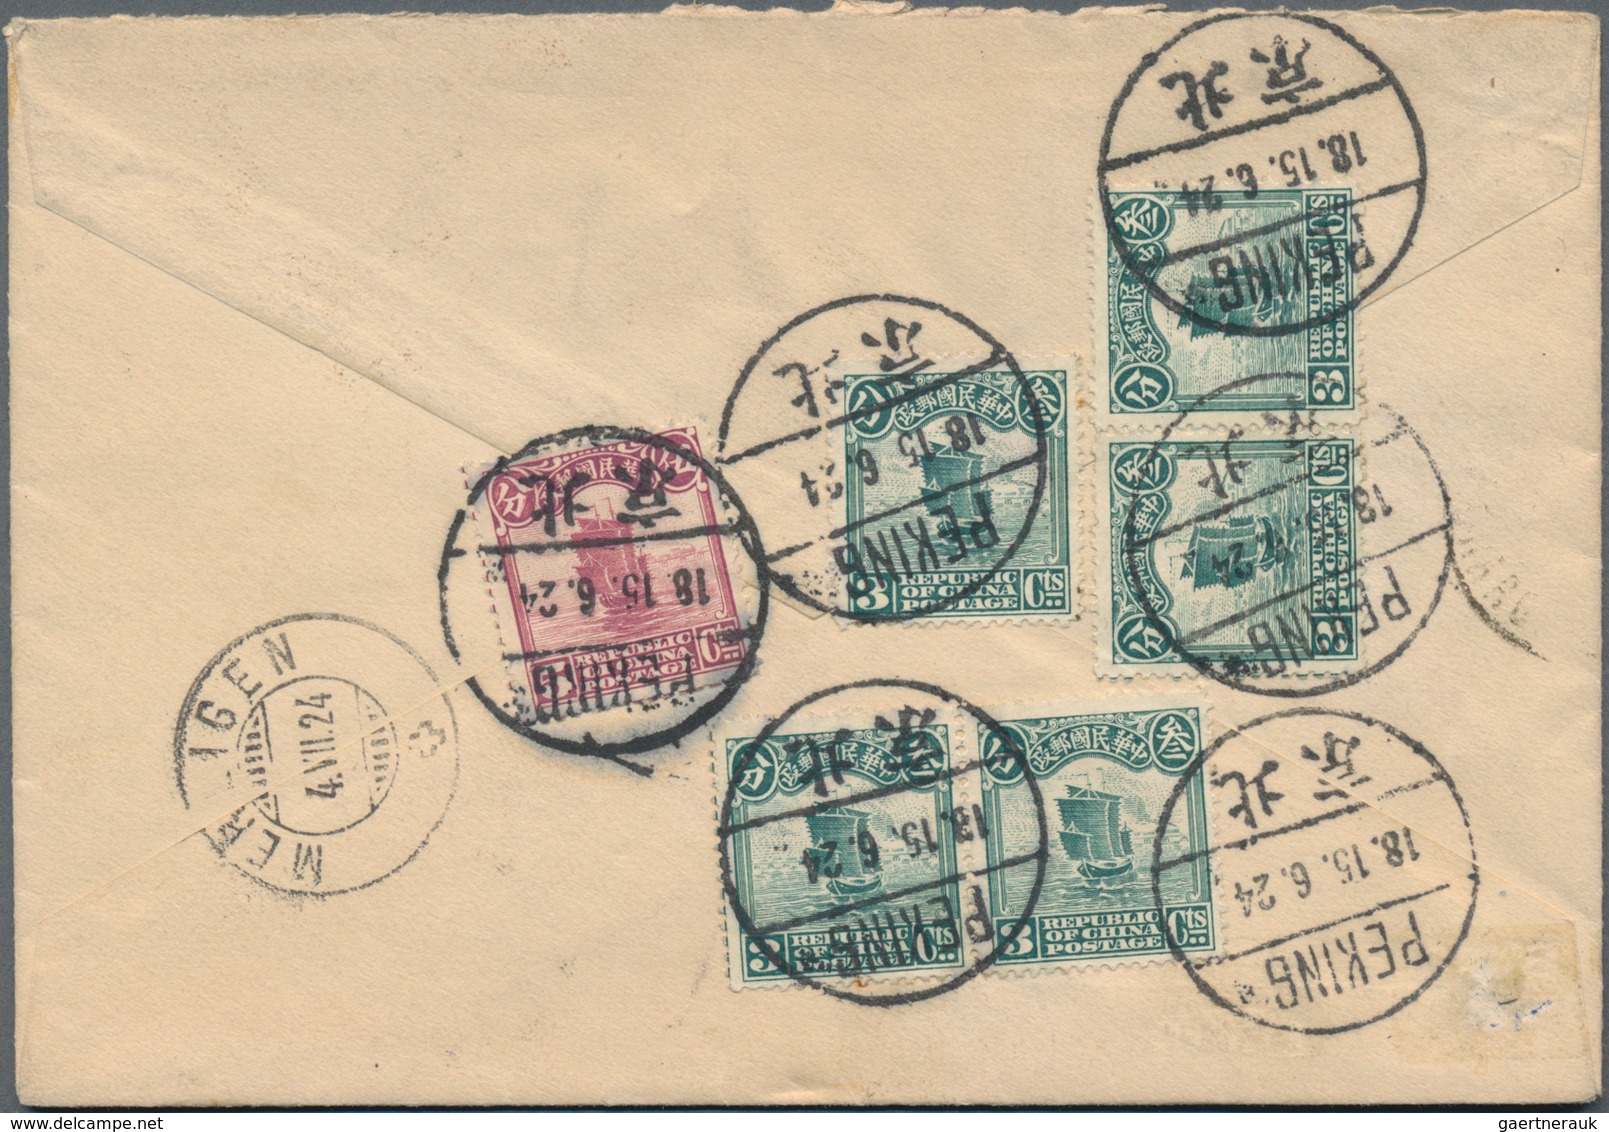 China: 1913/33, junk/reaper, covers (23 + 2 fronts) to Switzerland inc. surcharged, registration.